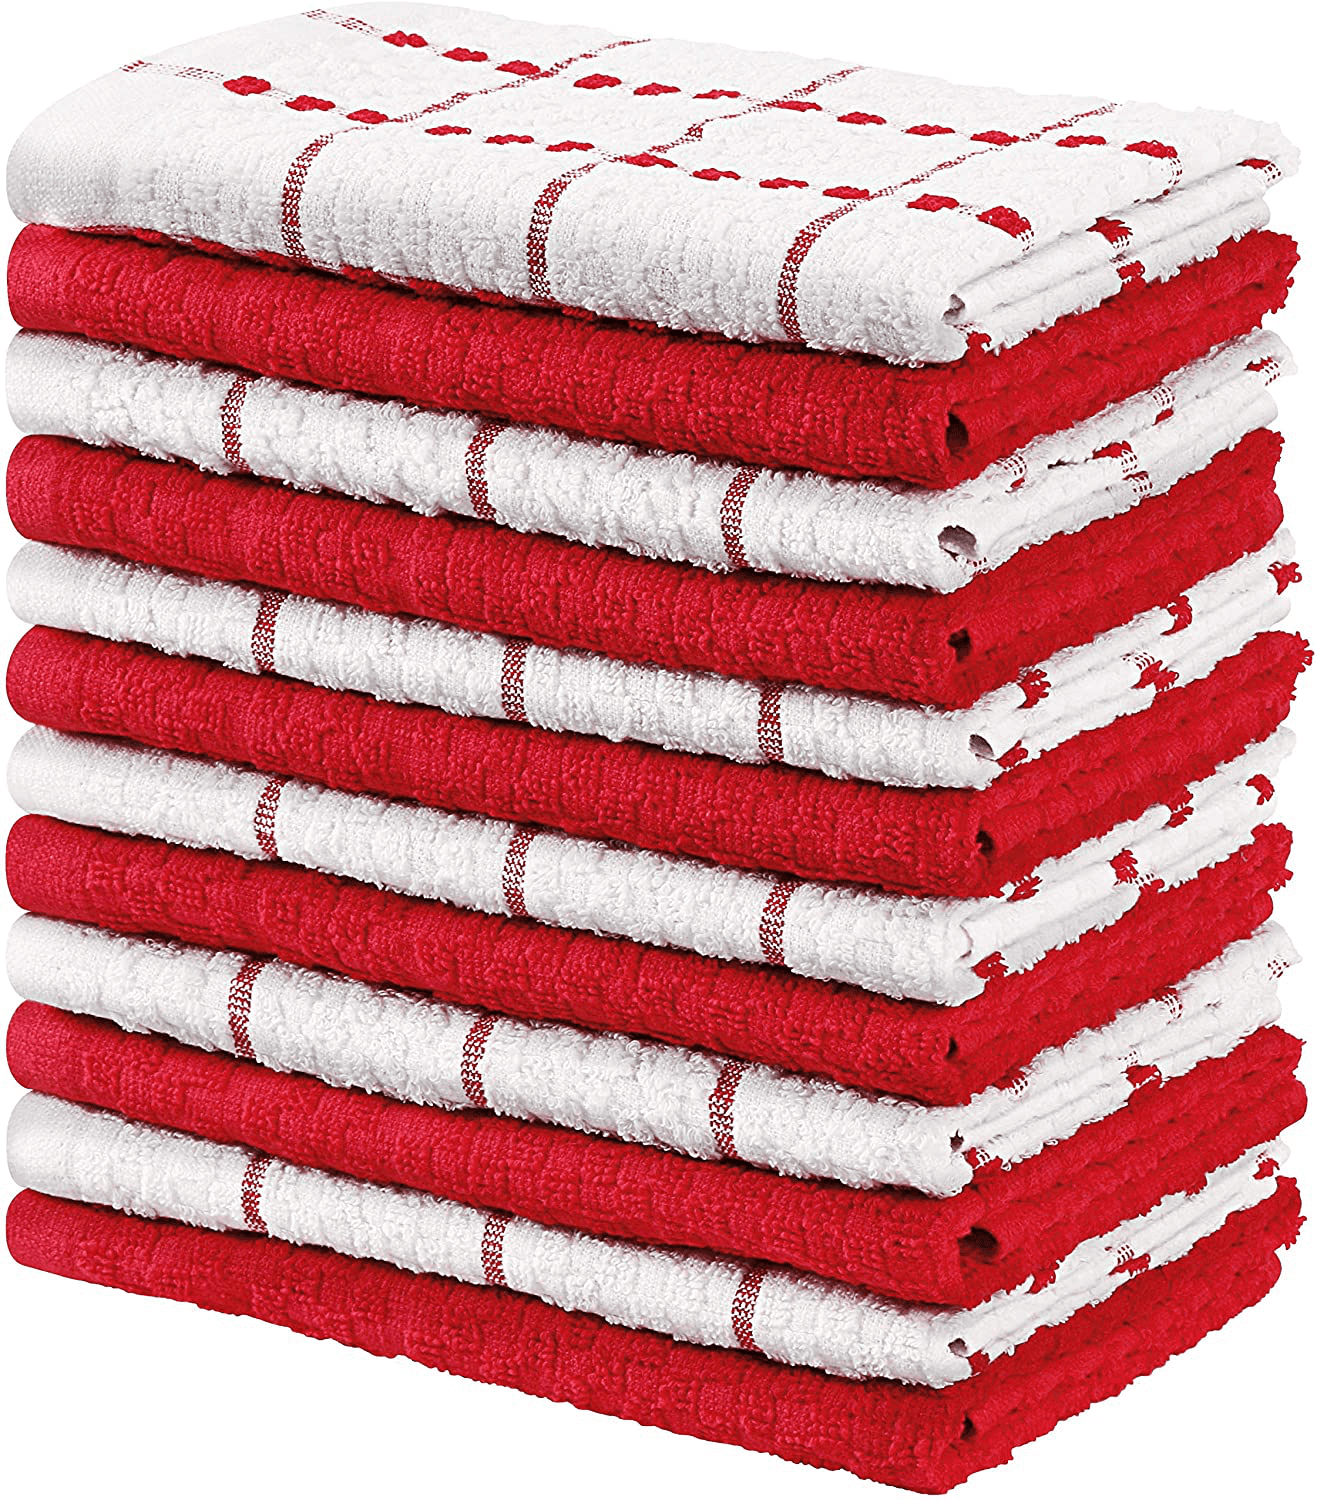 Utopia Super Absorbent Kitchen Towels 15 x 25 Pack of 6 - Red, 6